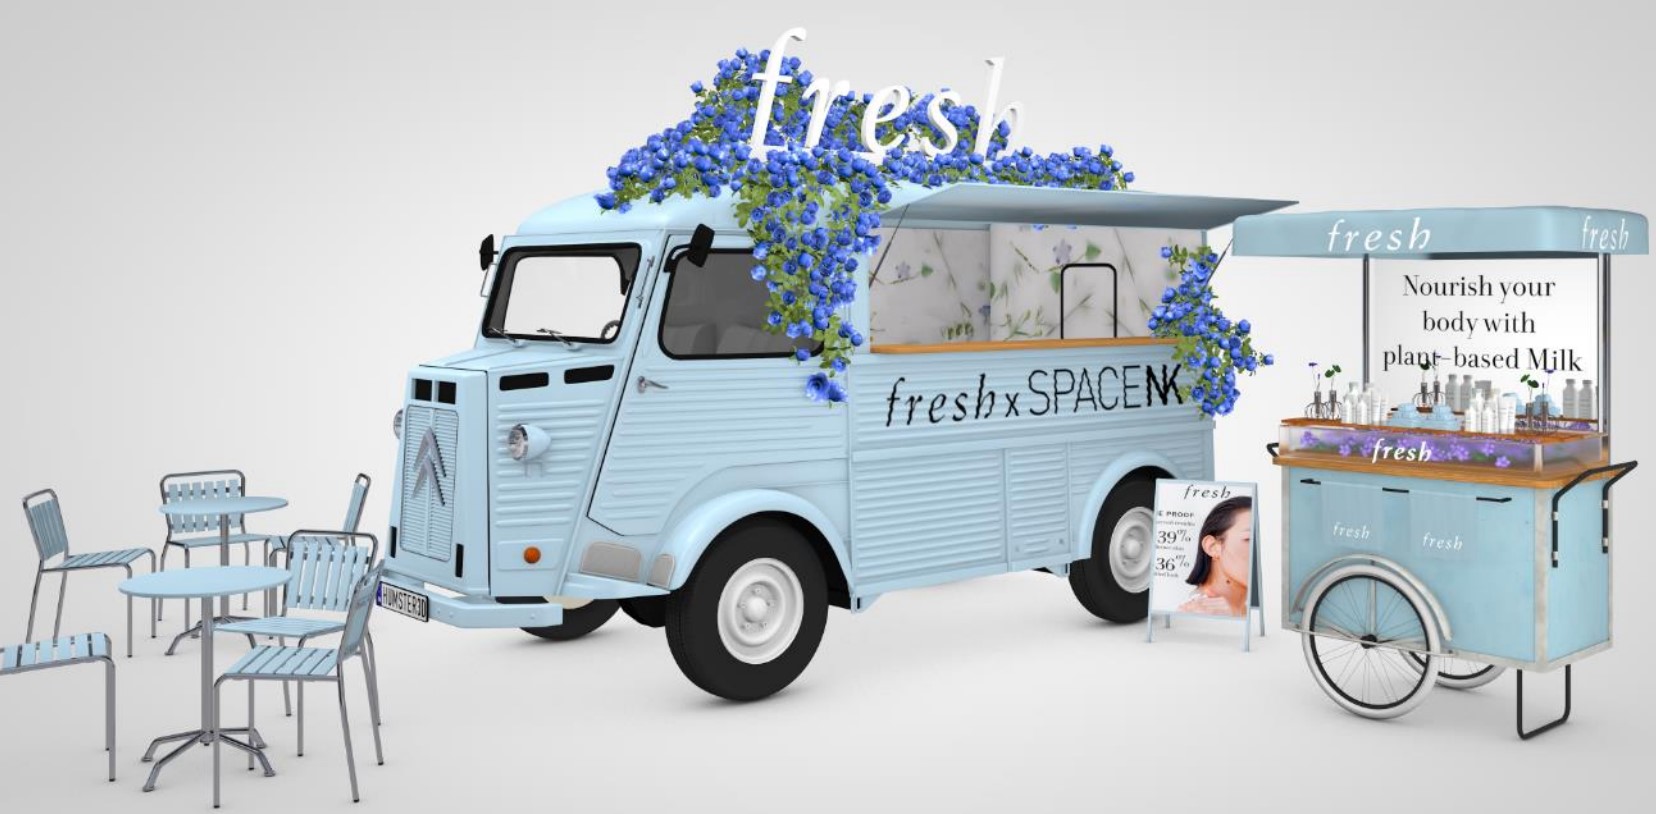 Fresh's proposed brief including Citroen H-van branded tabels and chais and mobile drinks cart blue with flowers